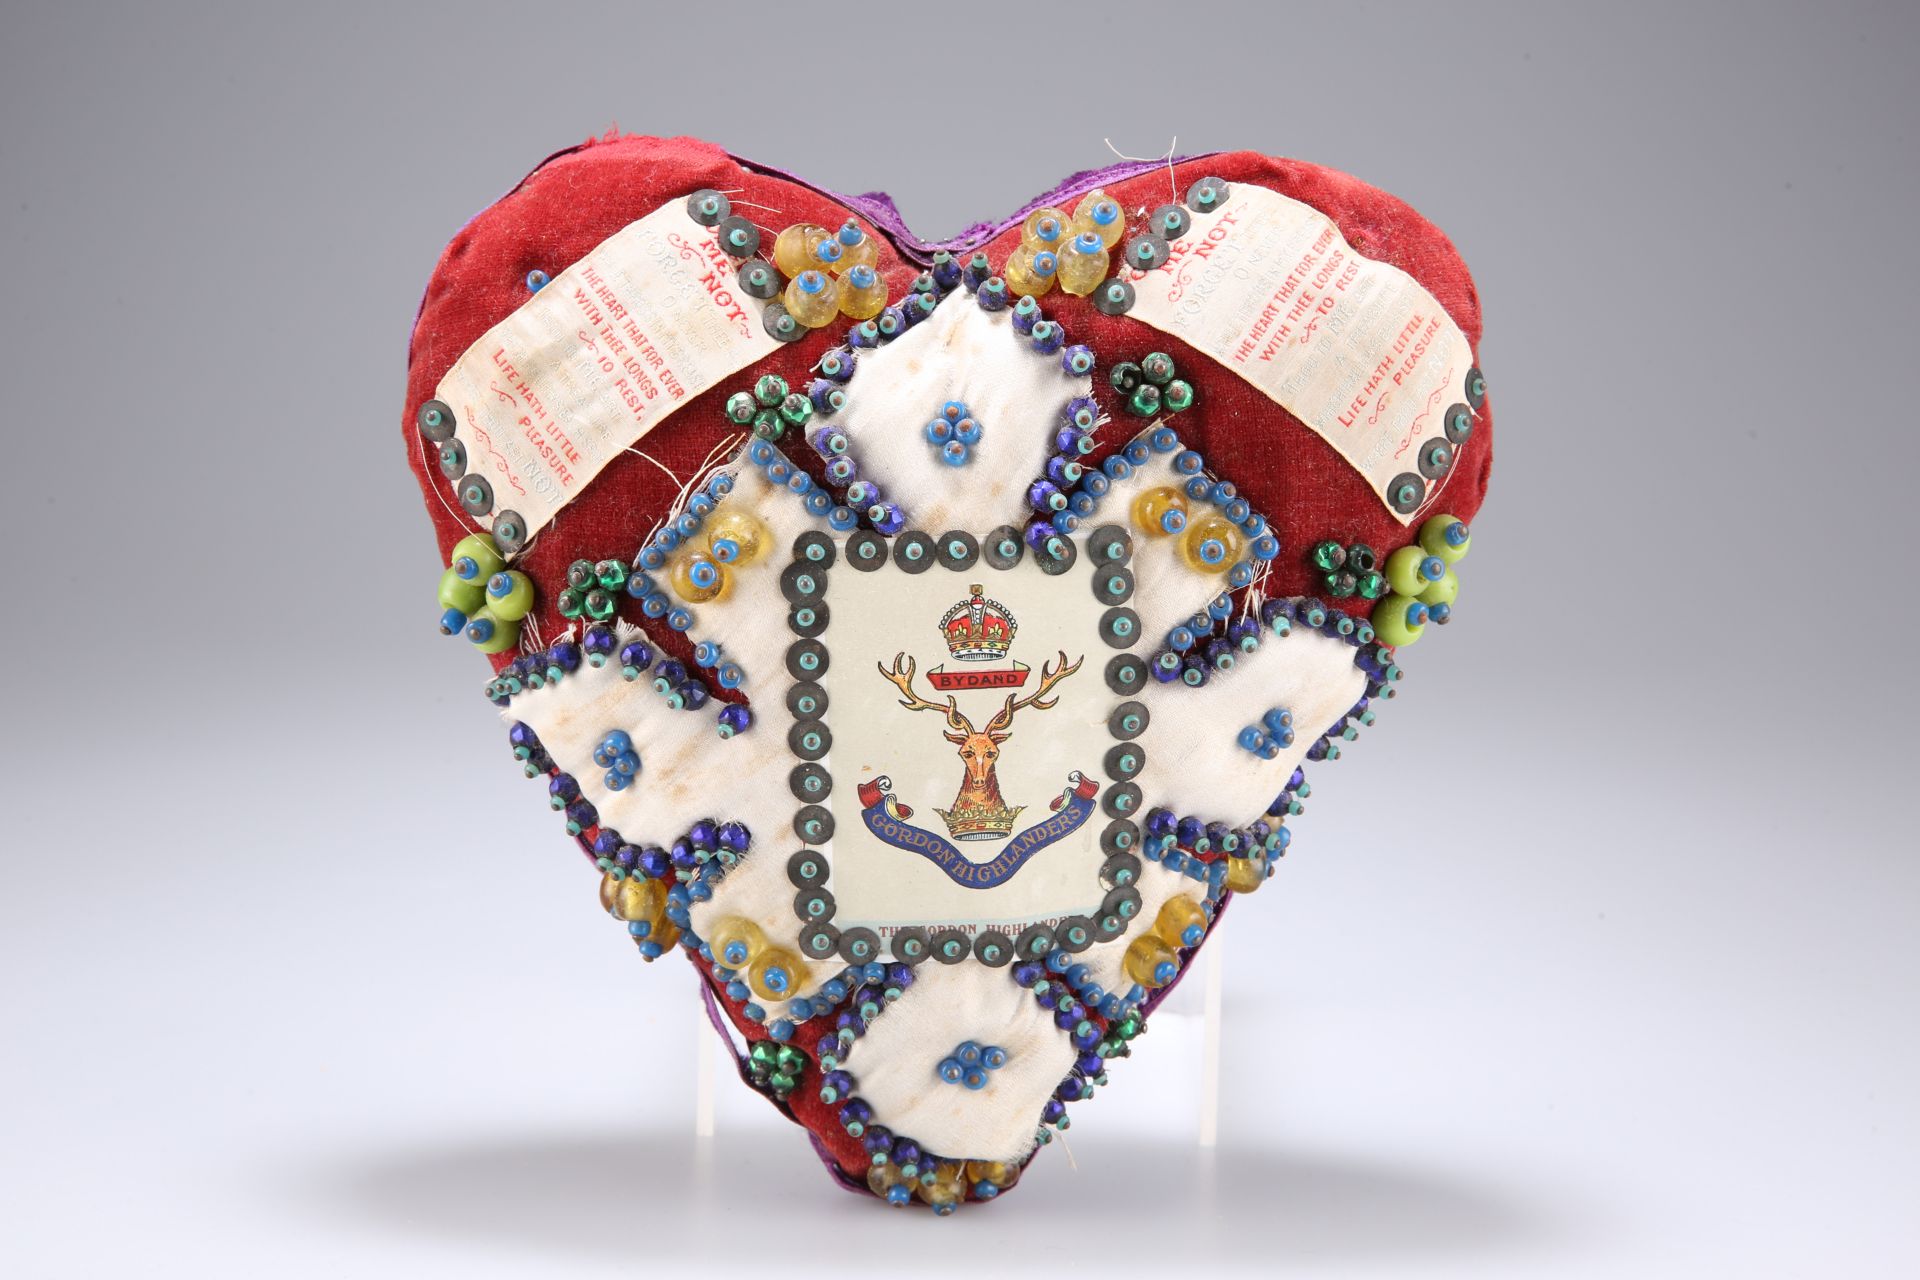 A HEART-SHAPED 'FORGET ME NOT' CUSHION